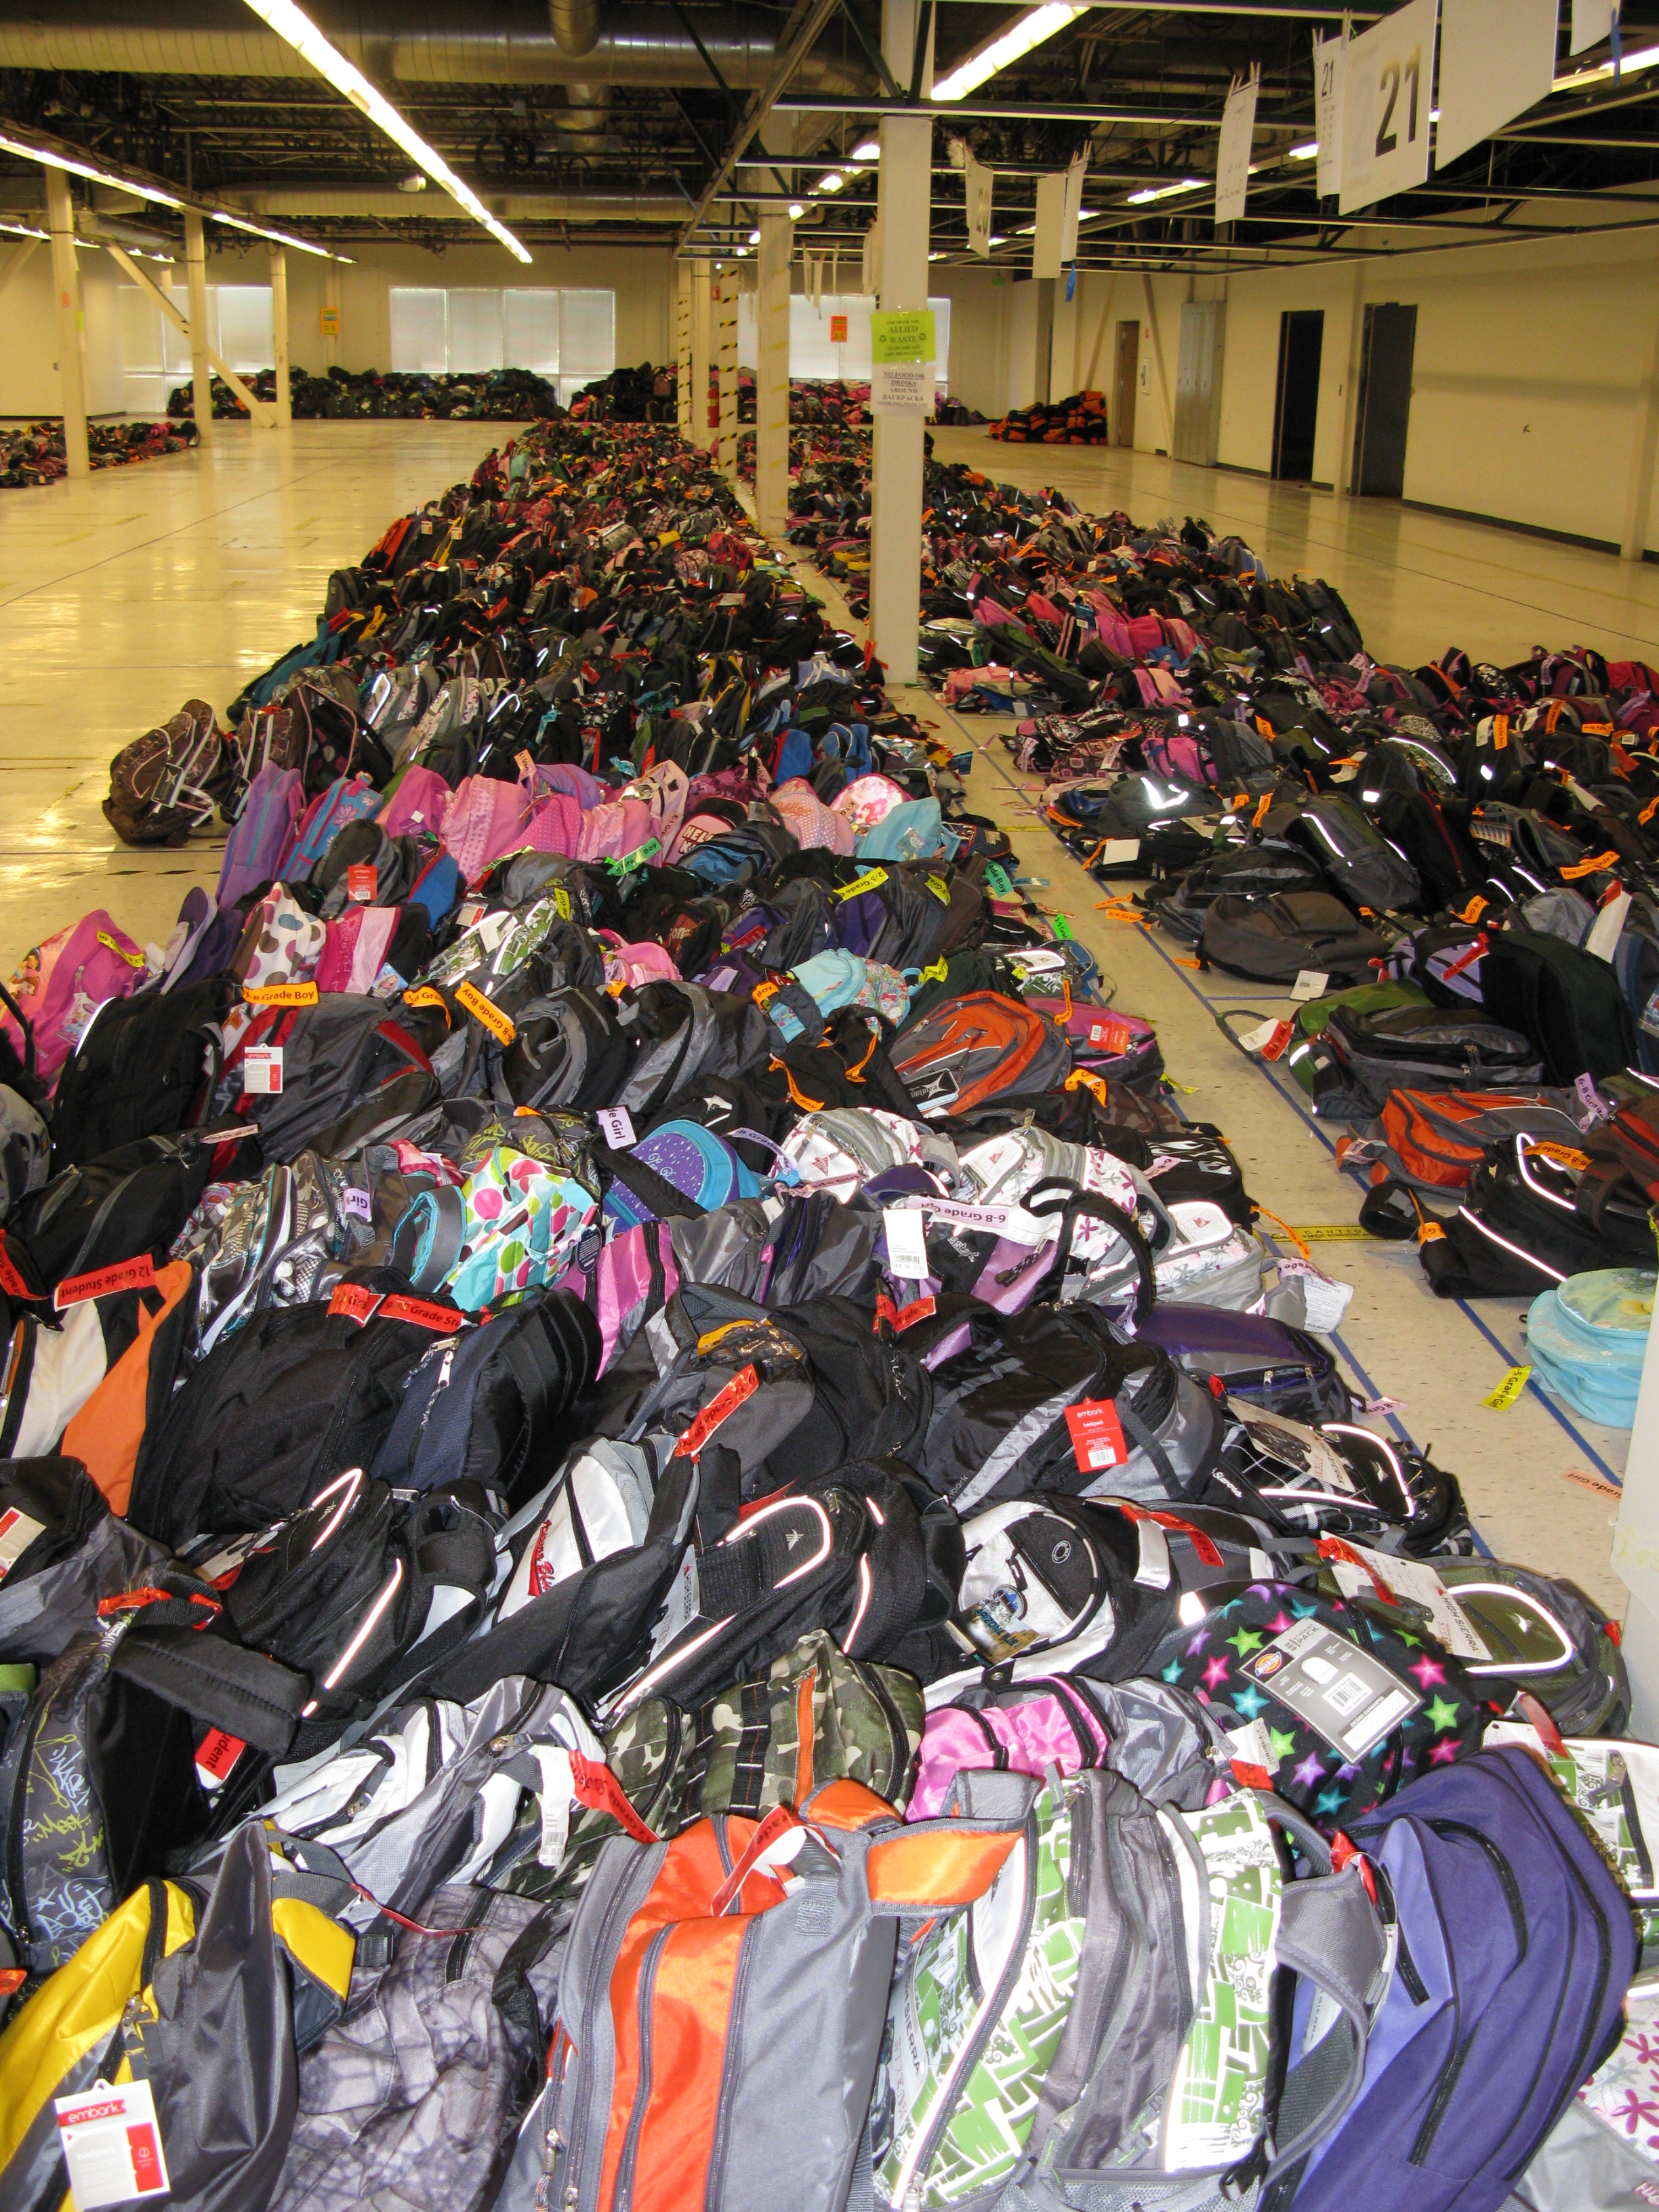 Thousands of backpacks filled with school supplies are collected in a warehouse, ready for distribution. (Family Giving Tree)